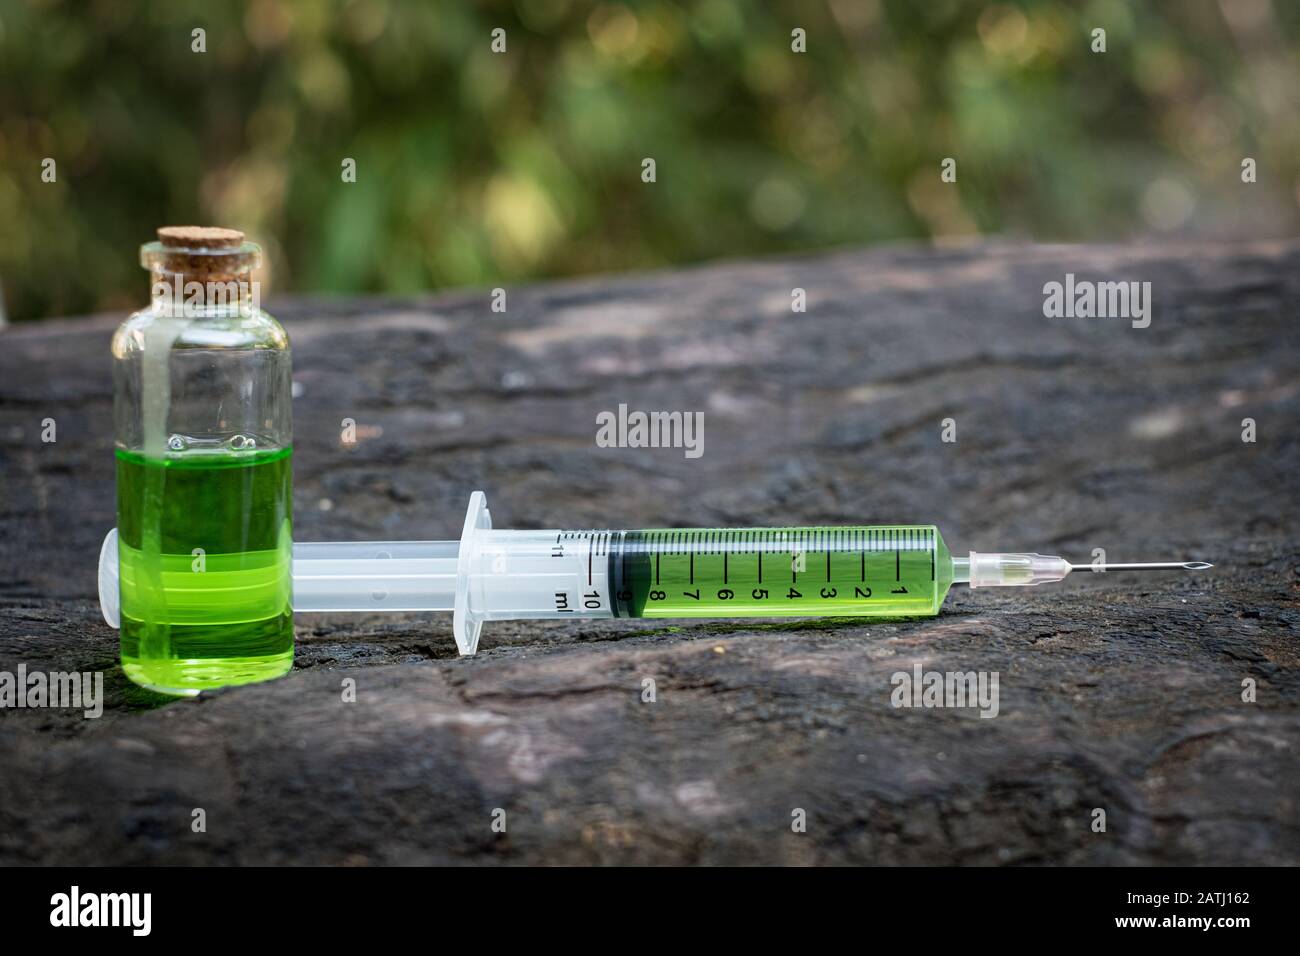 Syringe there is medicine inside on table old wood Stock Photo